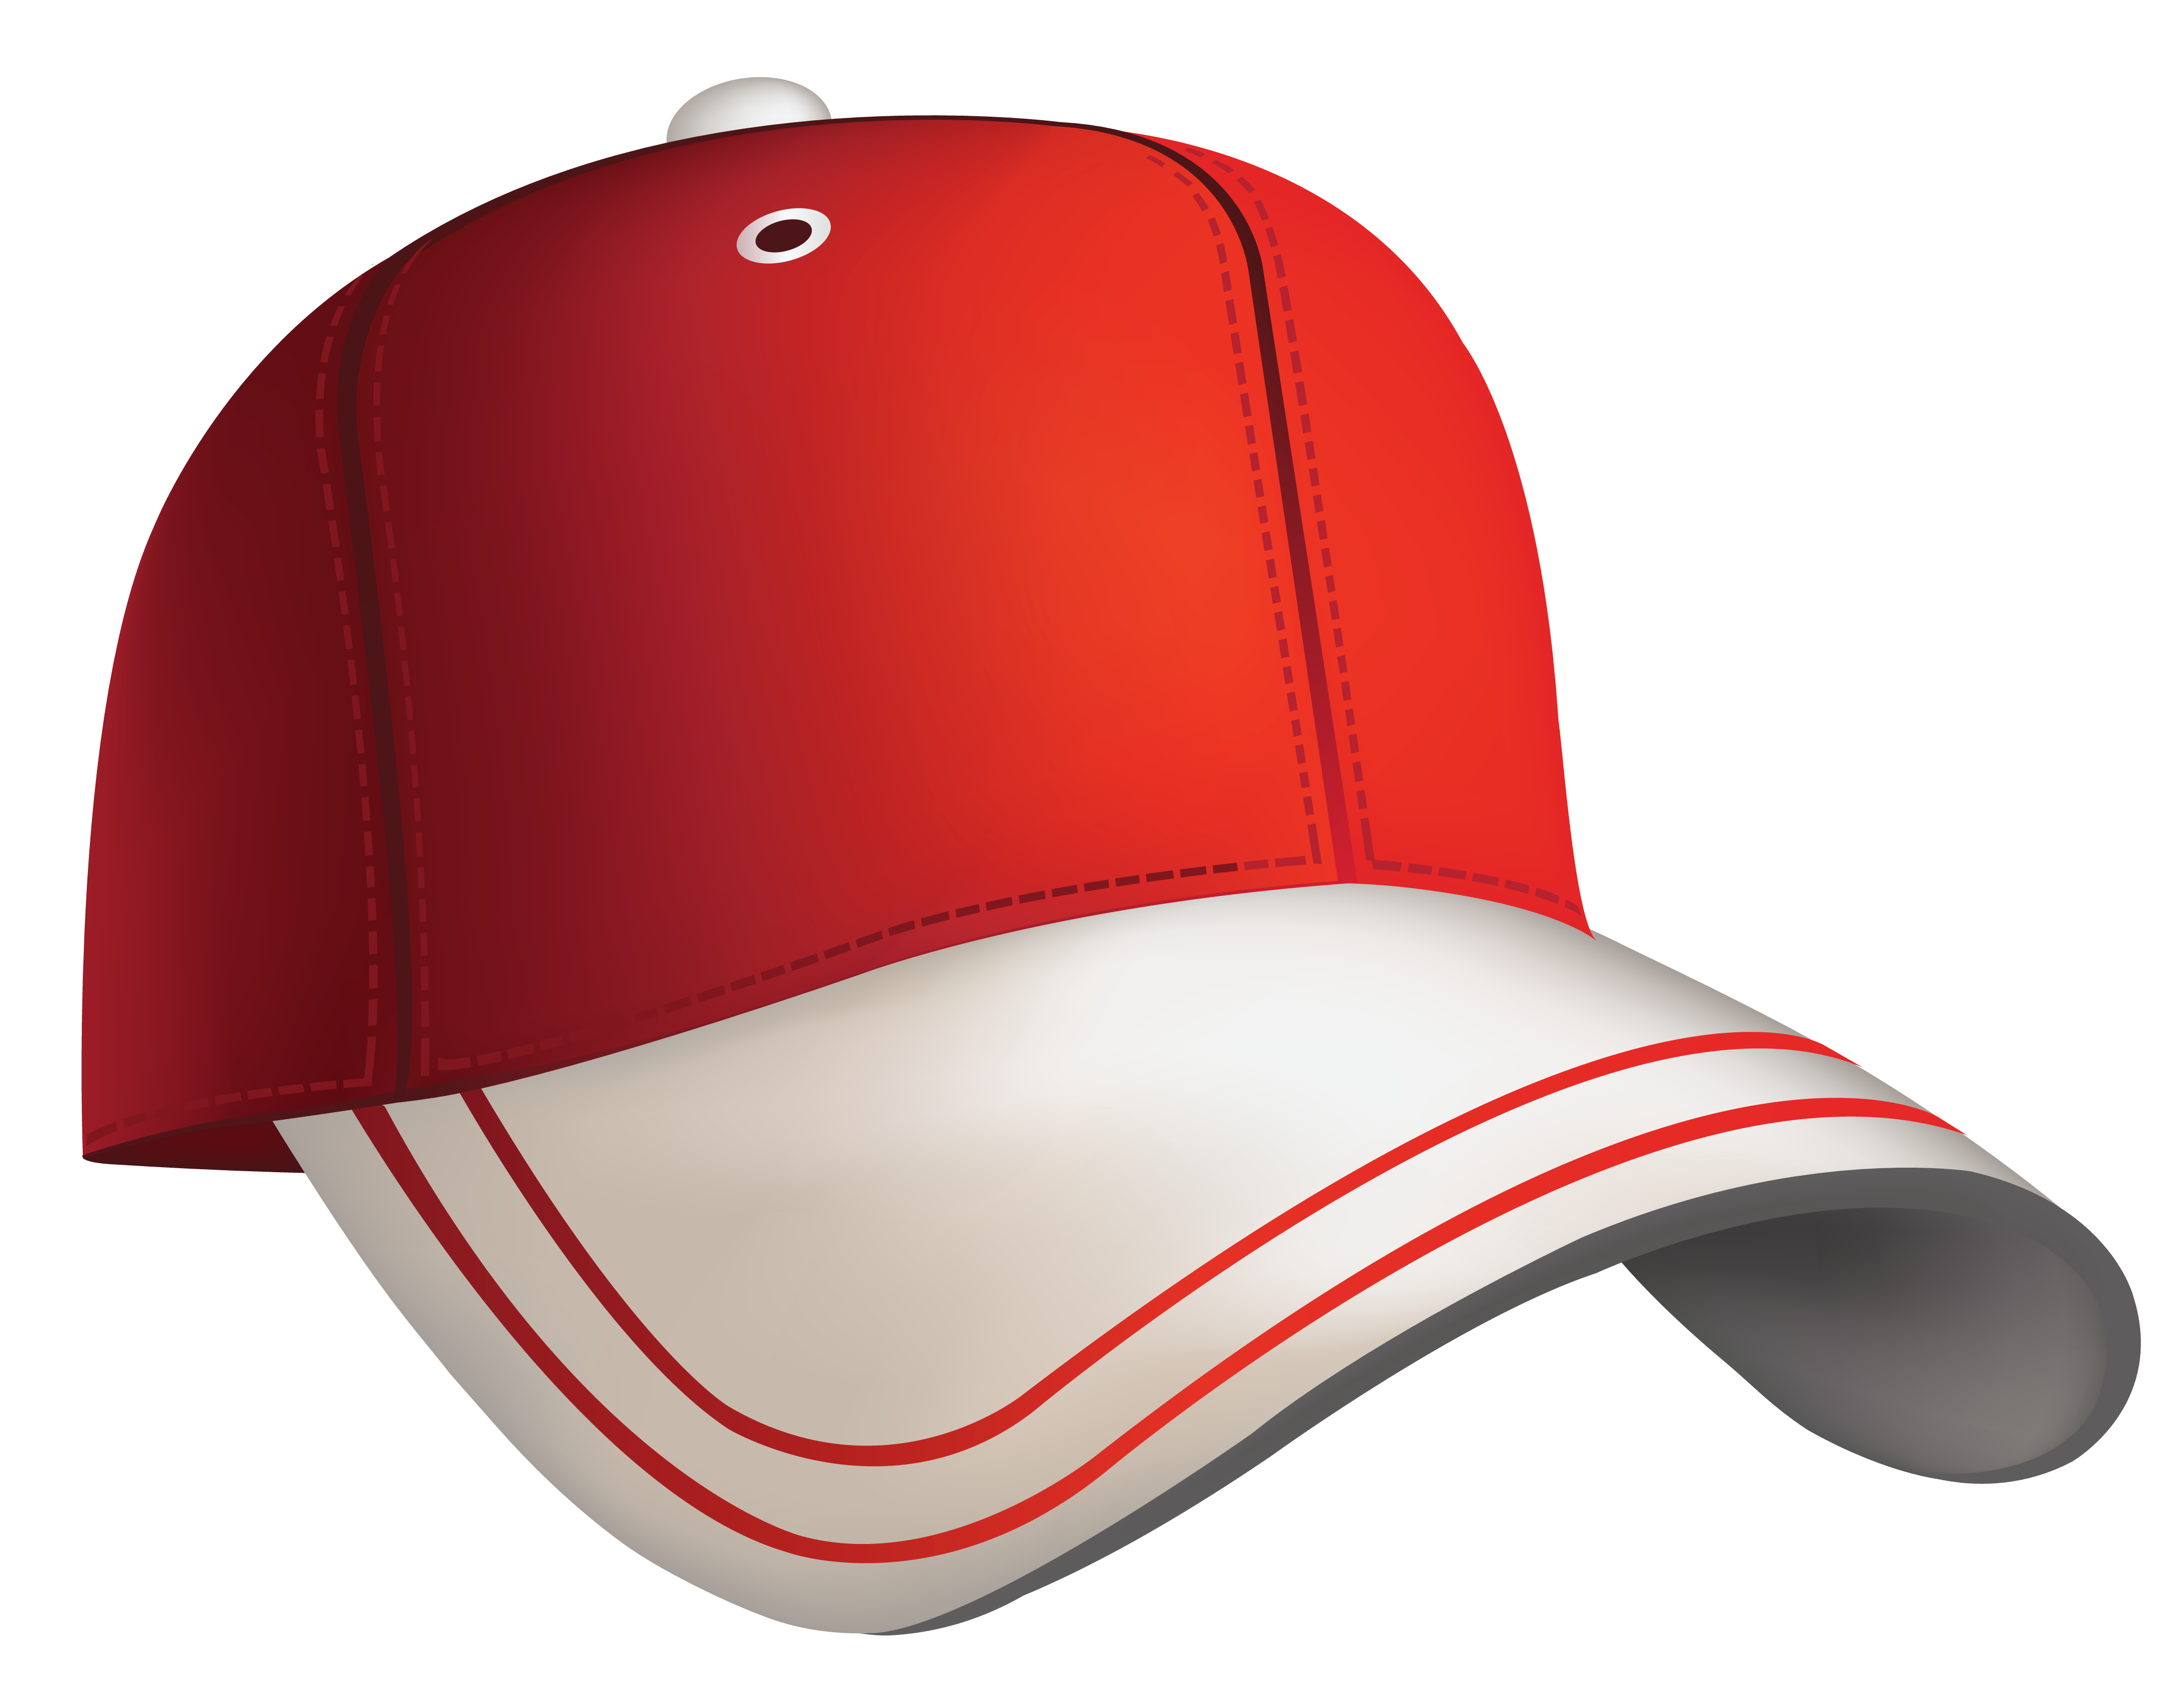 Baseball hat clipart front